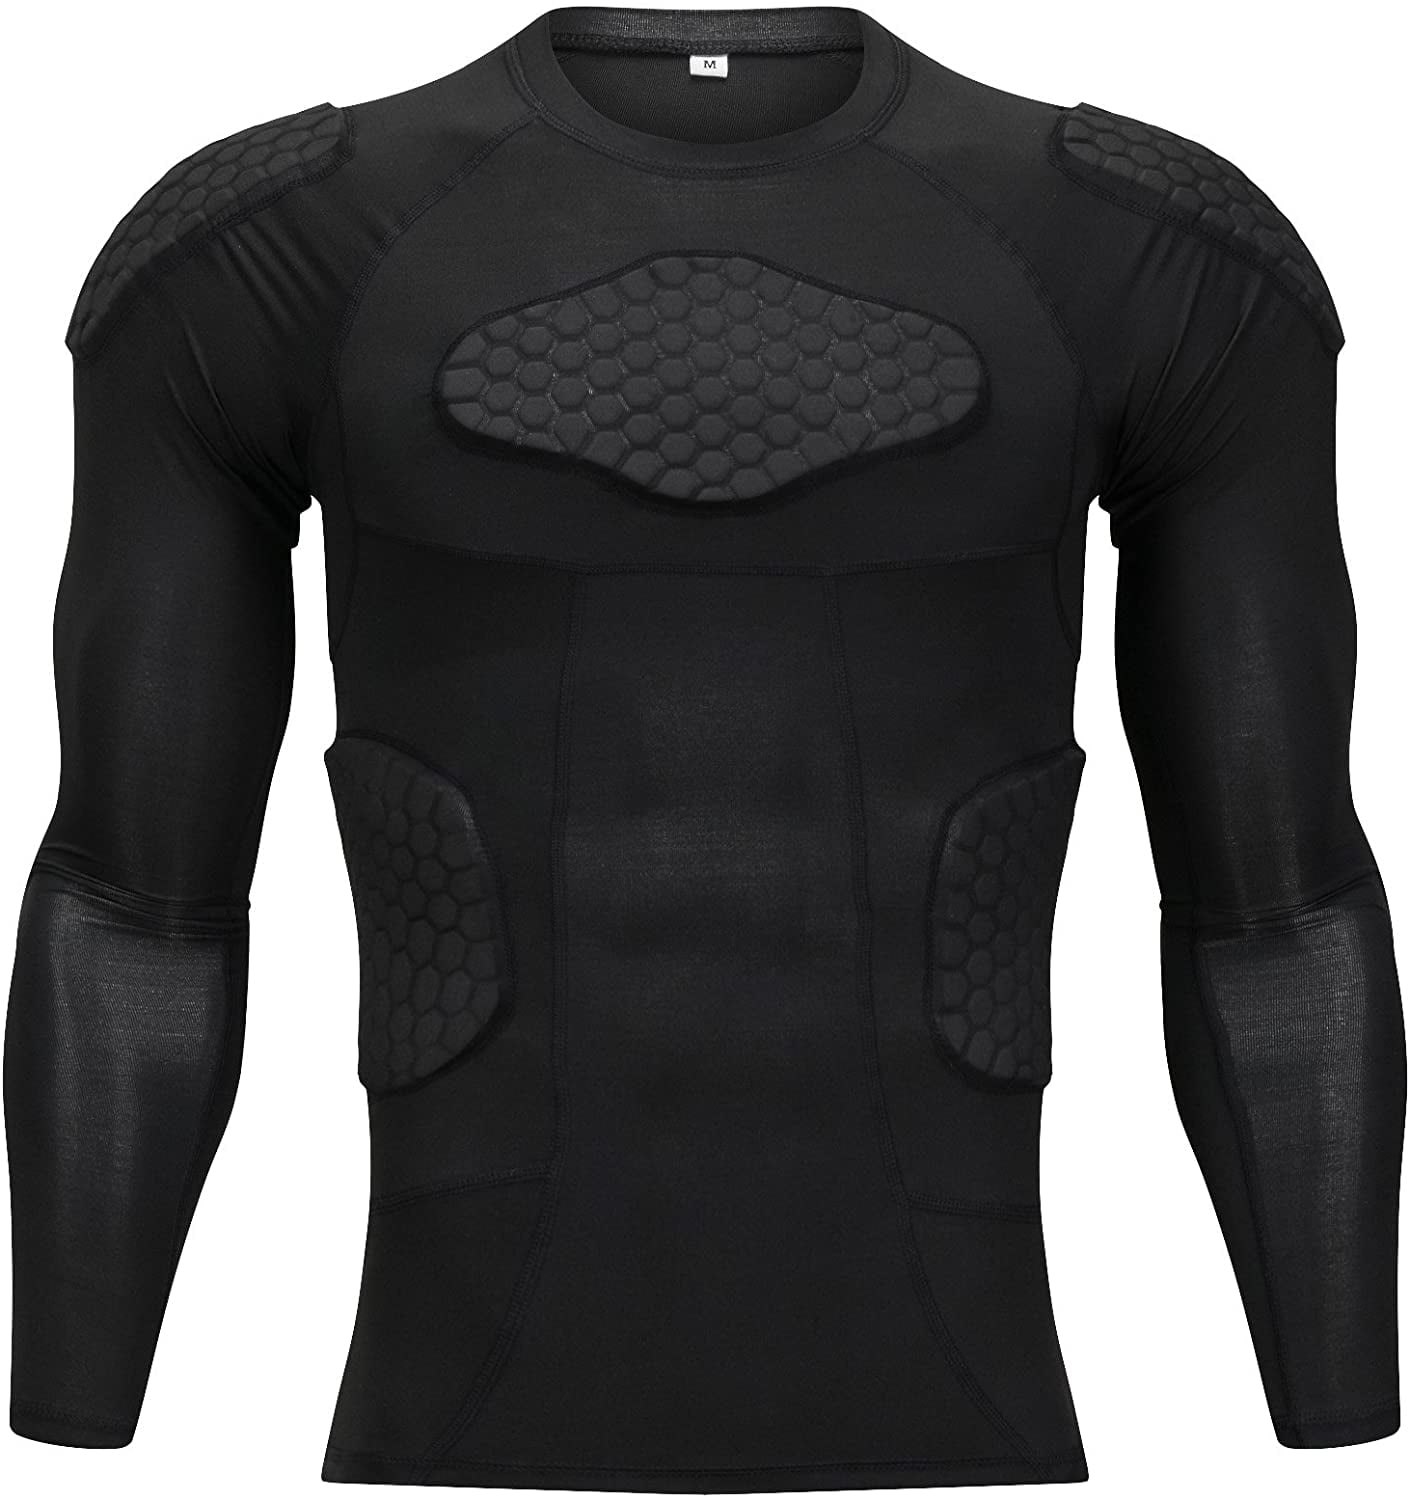 New Tuoy Men's Padded Rib Chest Protector Sports Top Compression Black XL 